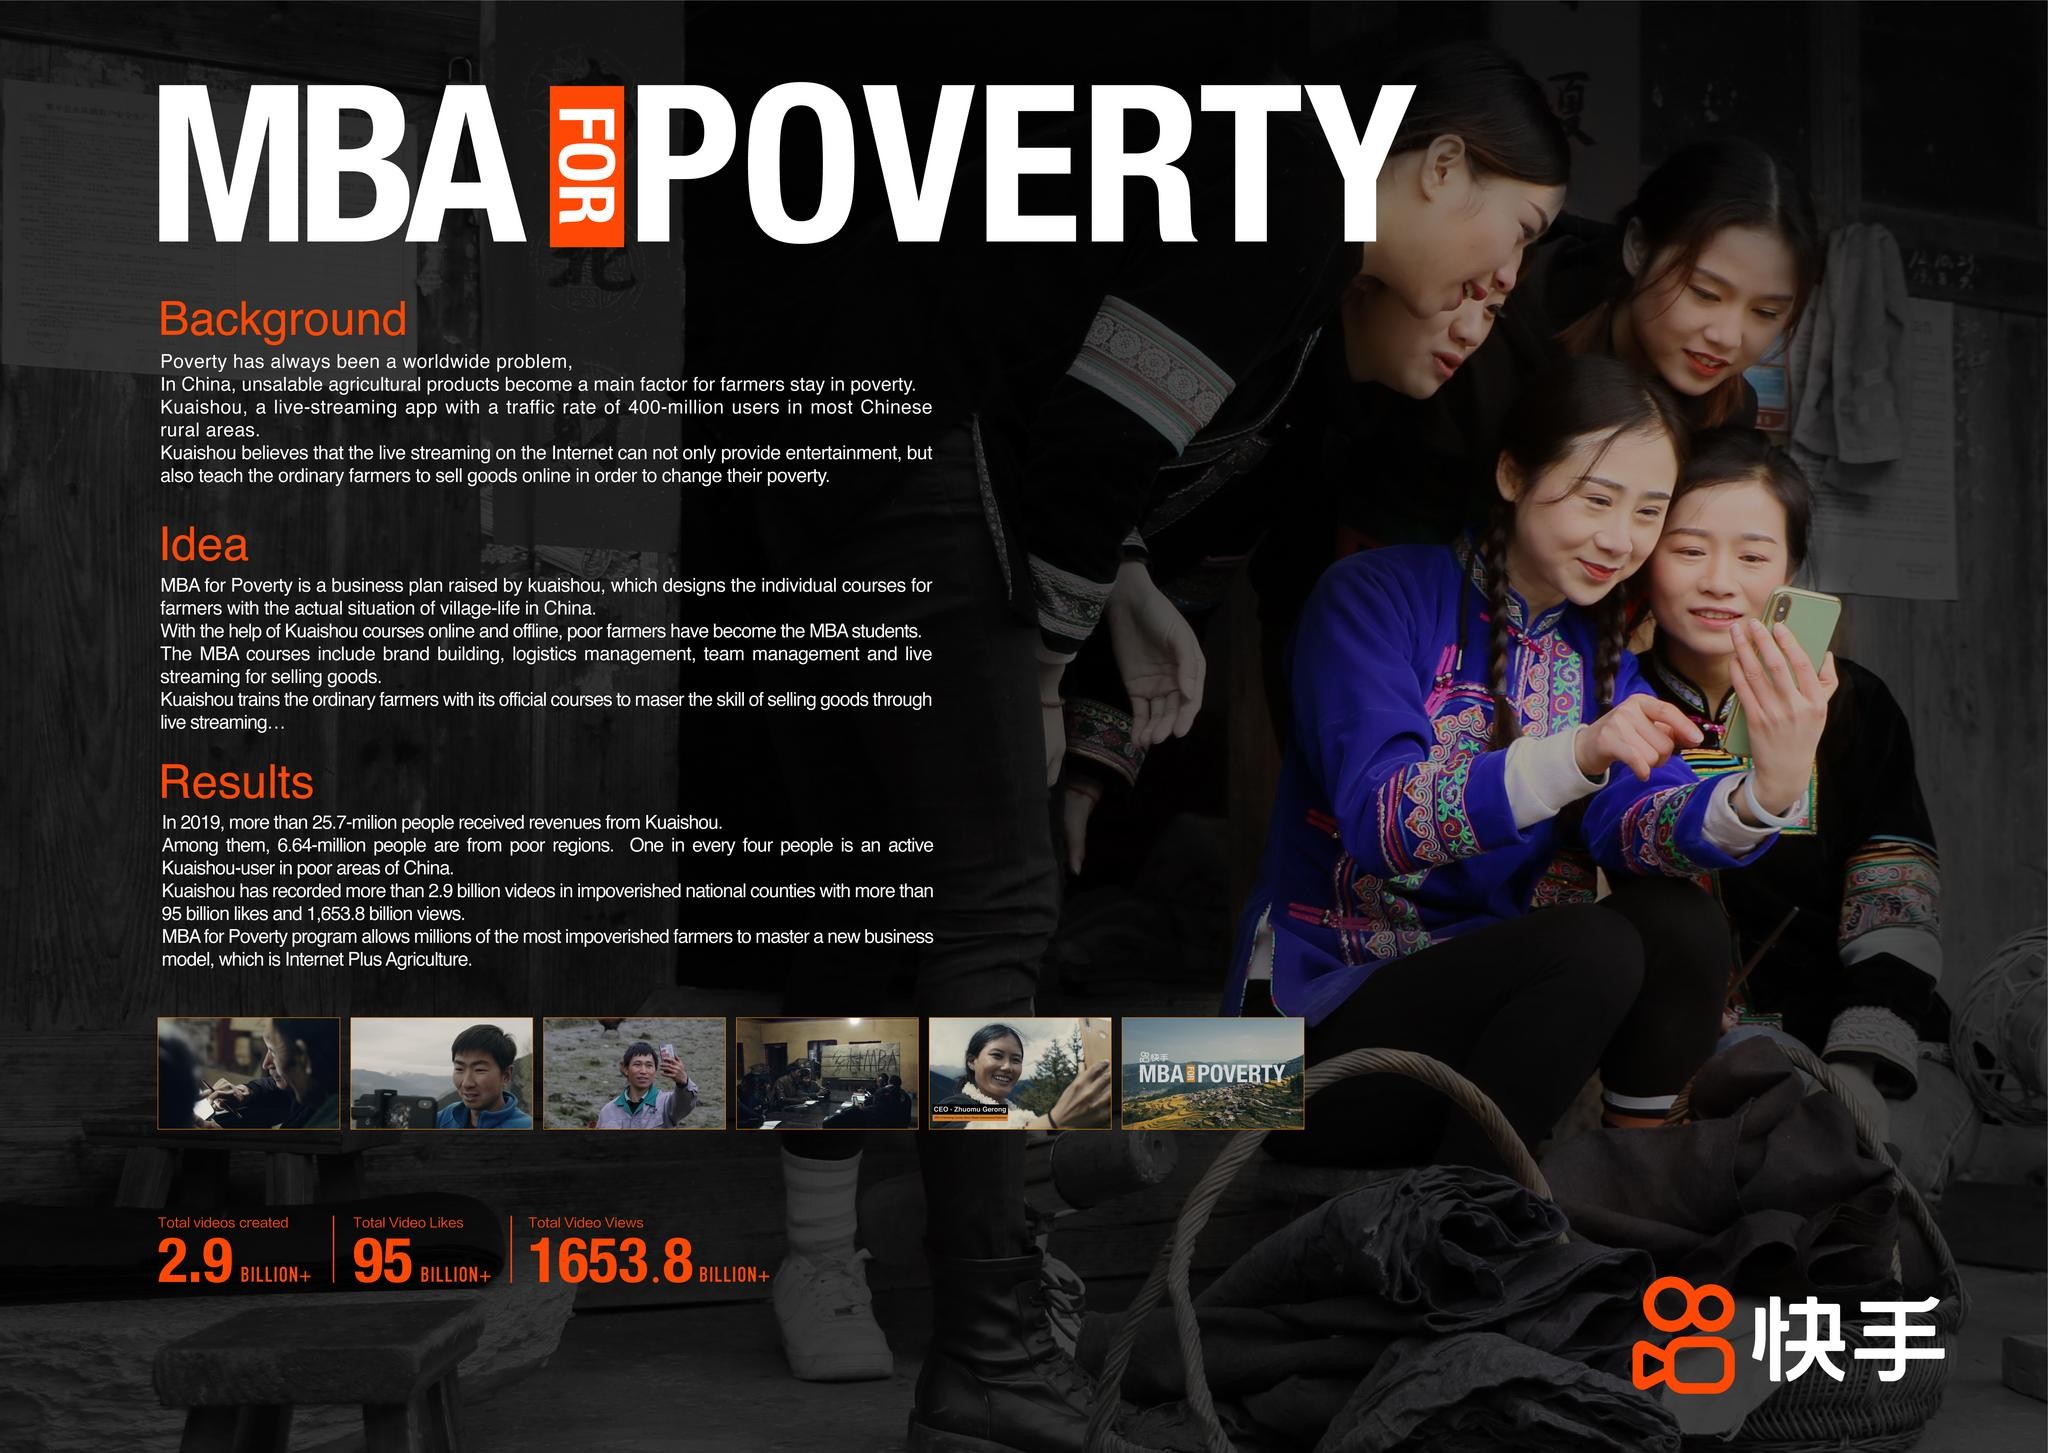 MBA FOR POVERTY